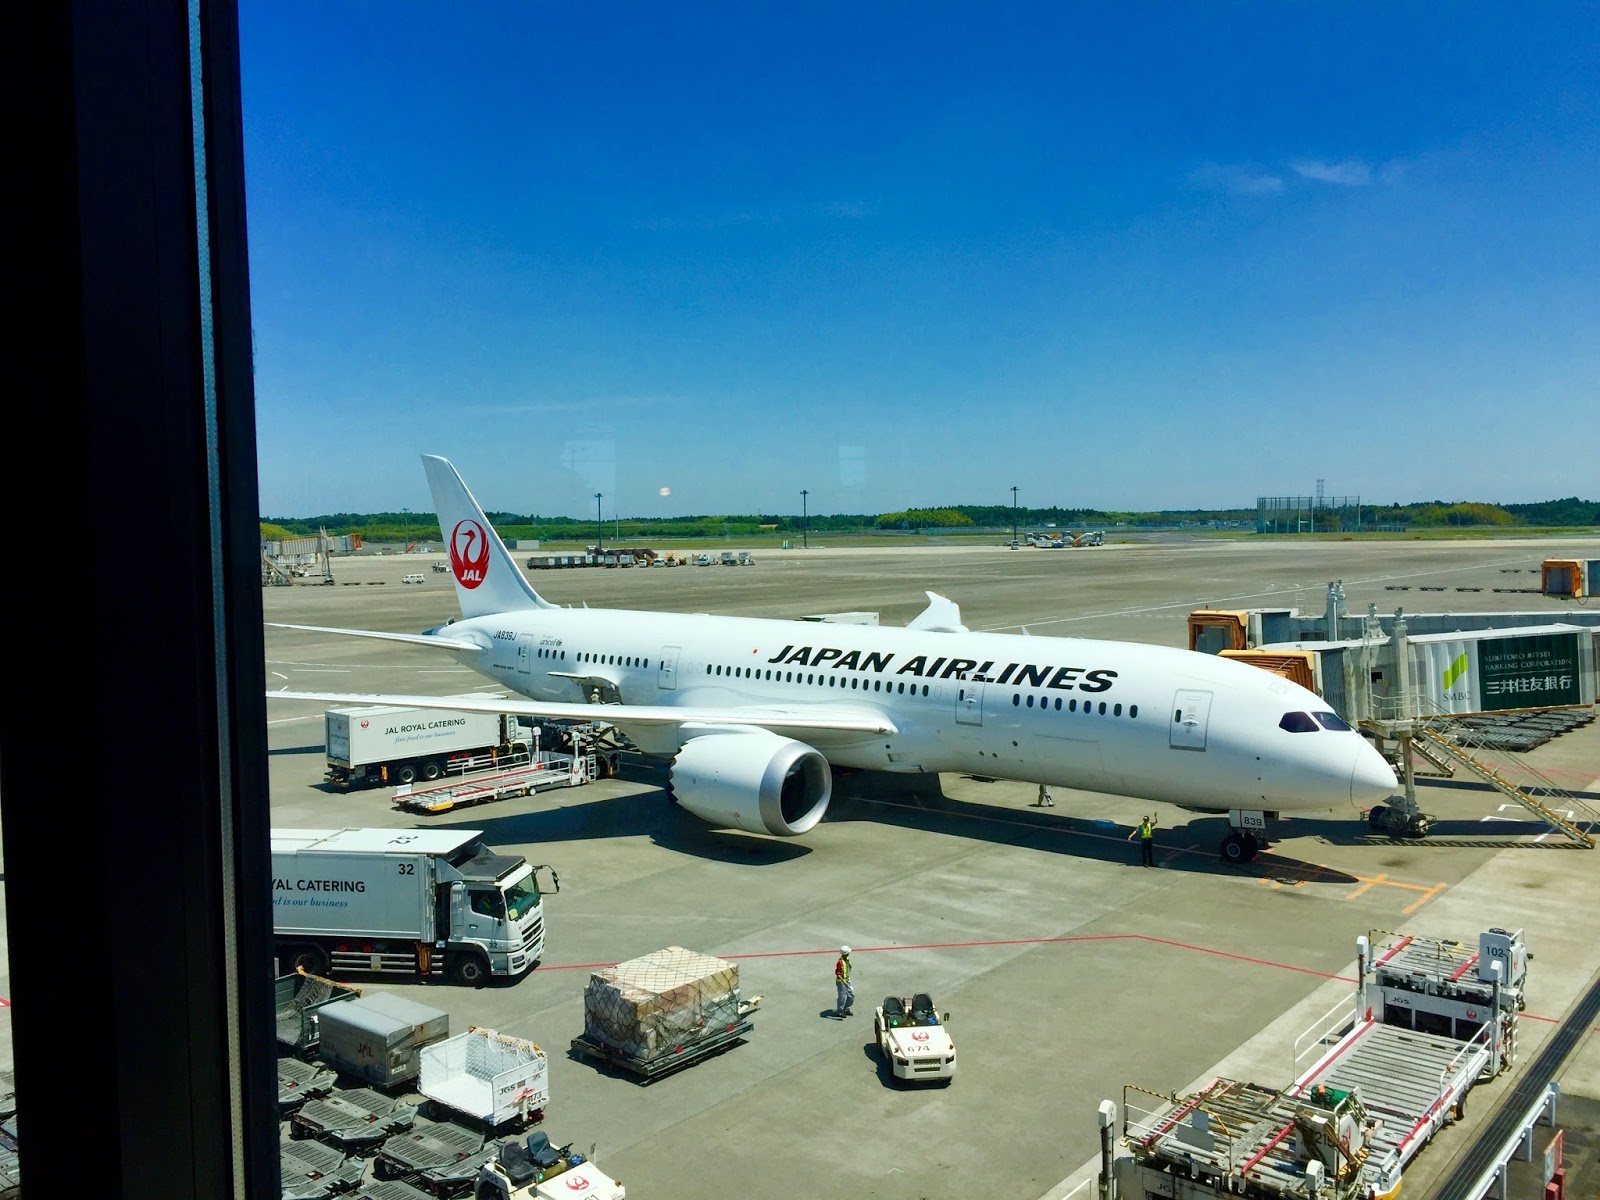 jal-787-8